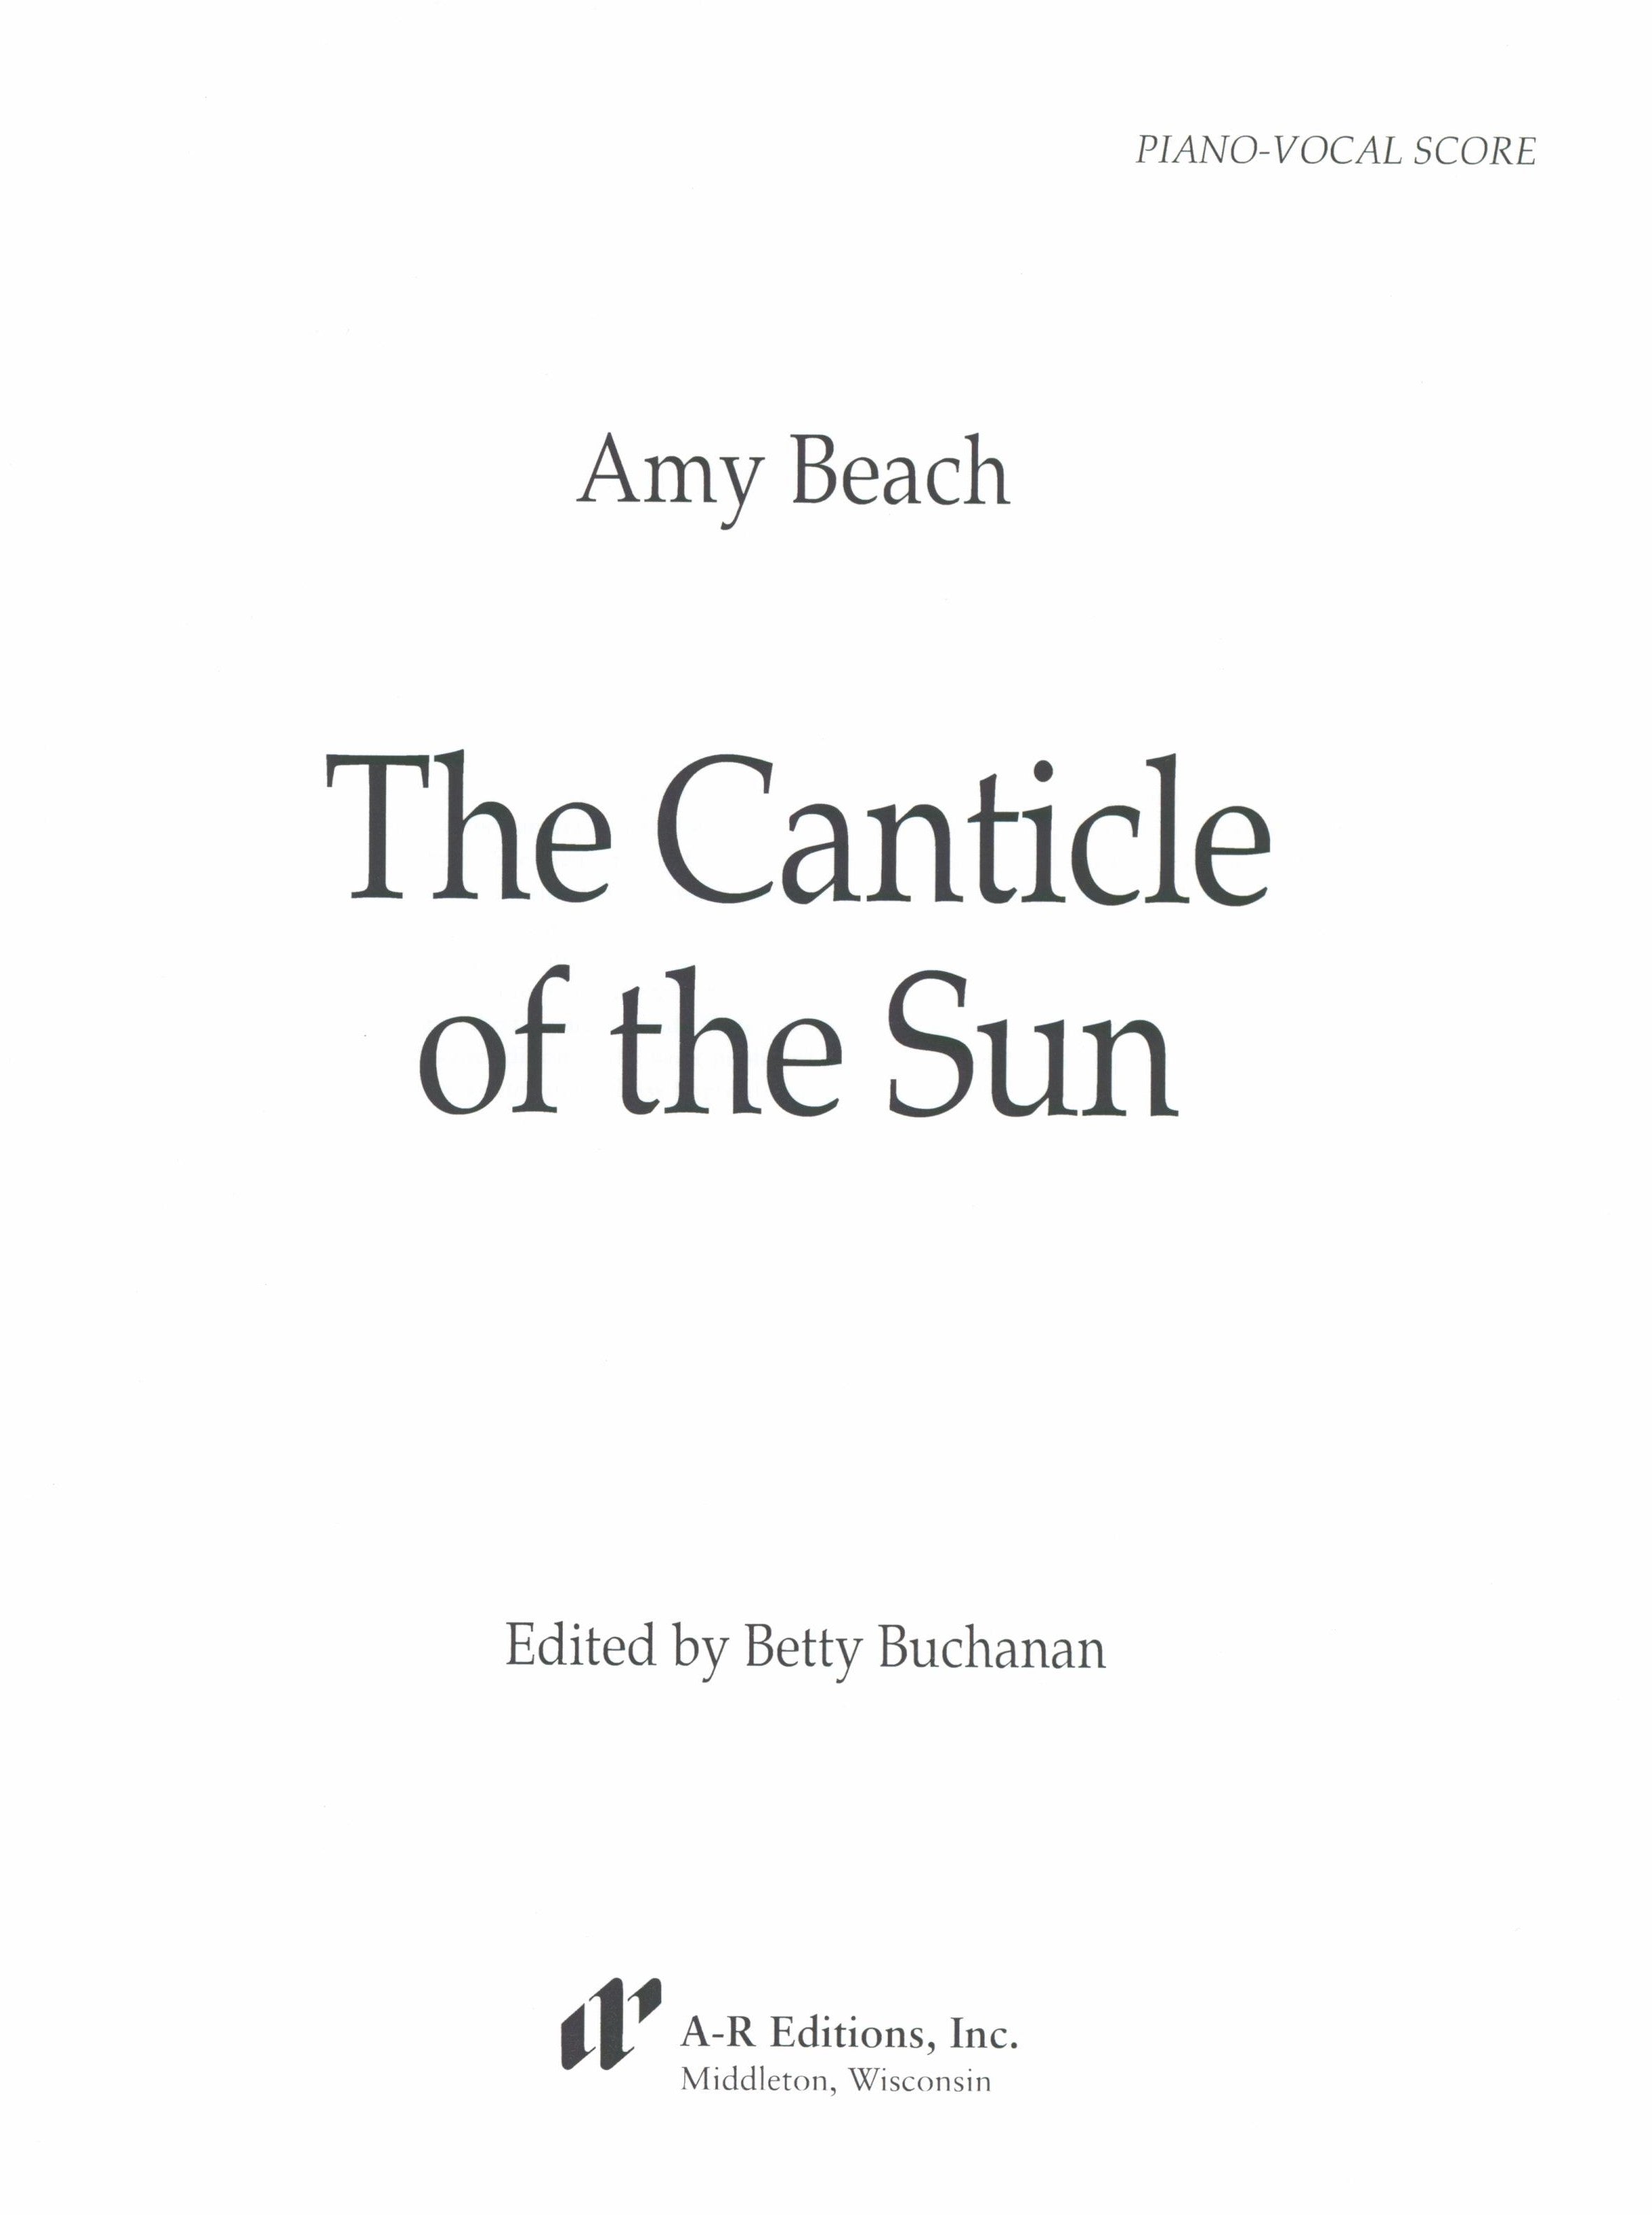 Canticle of the Sun 